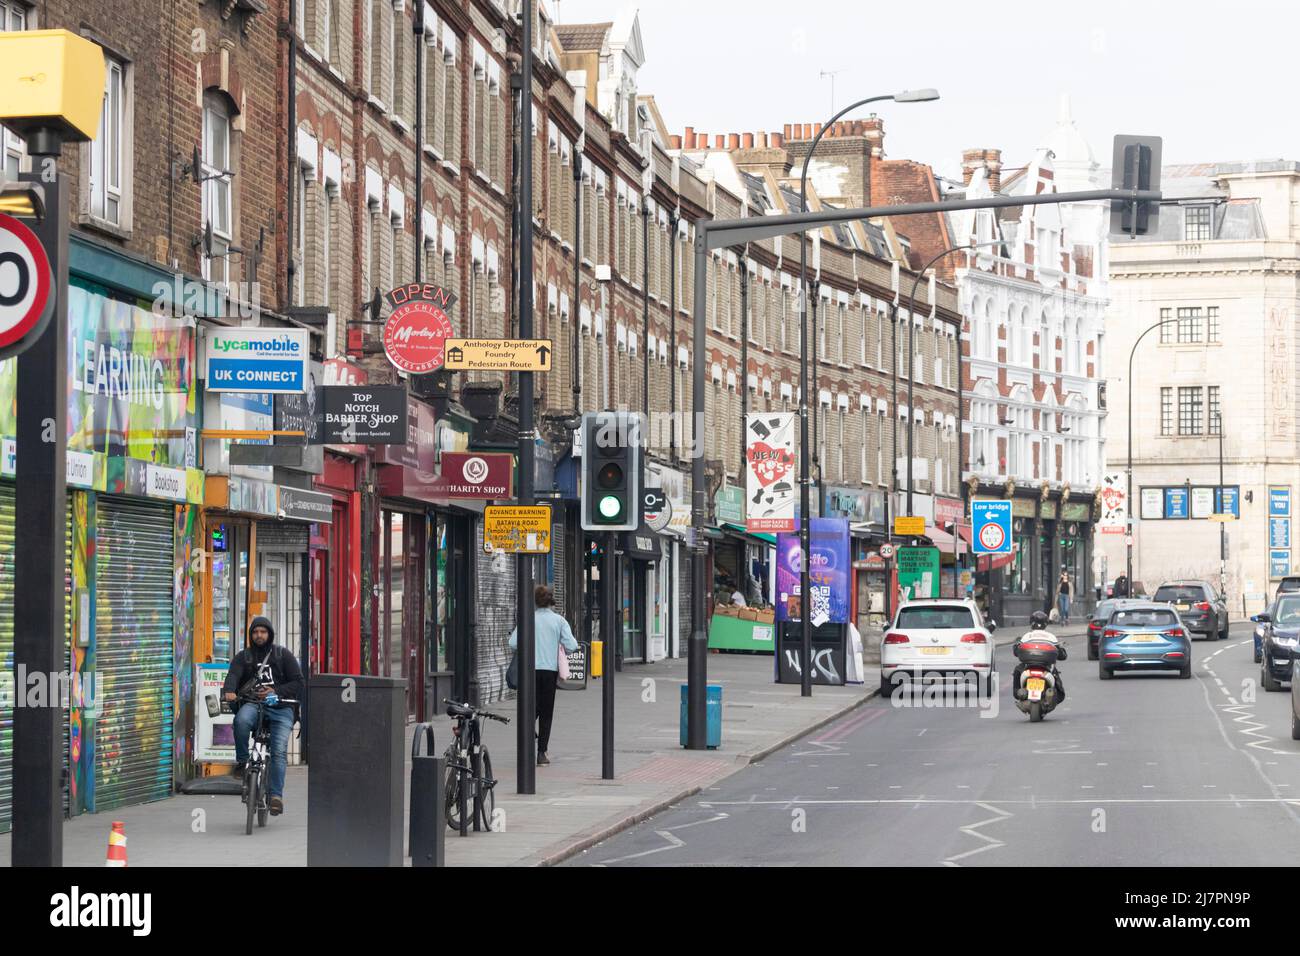 Daytime view of shops, pedestrians, and traffic on New Cross Road in London, England. Stock Photo